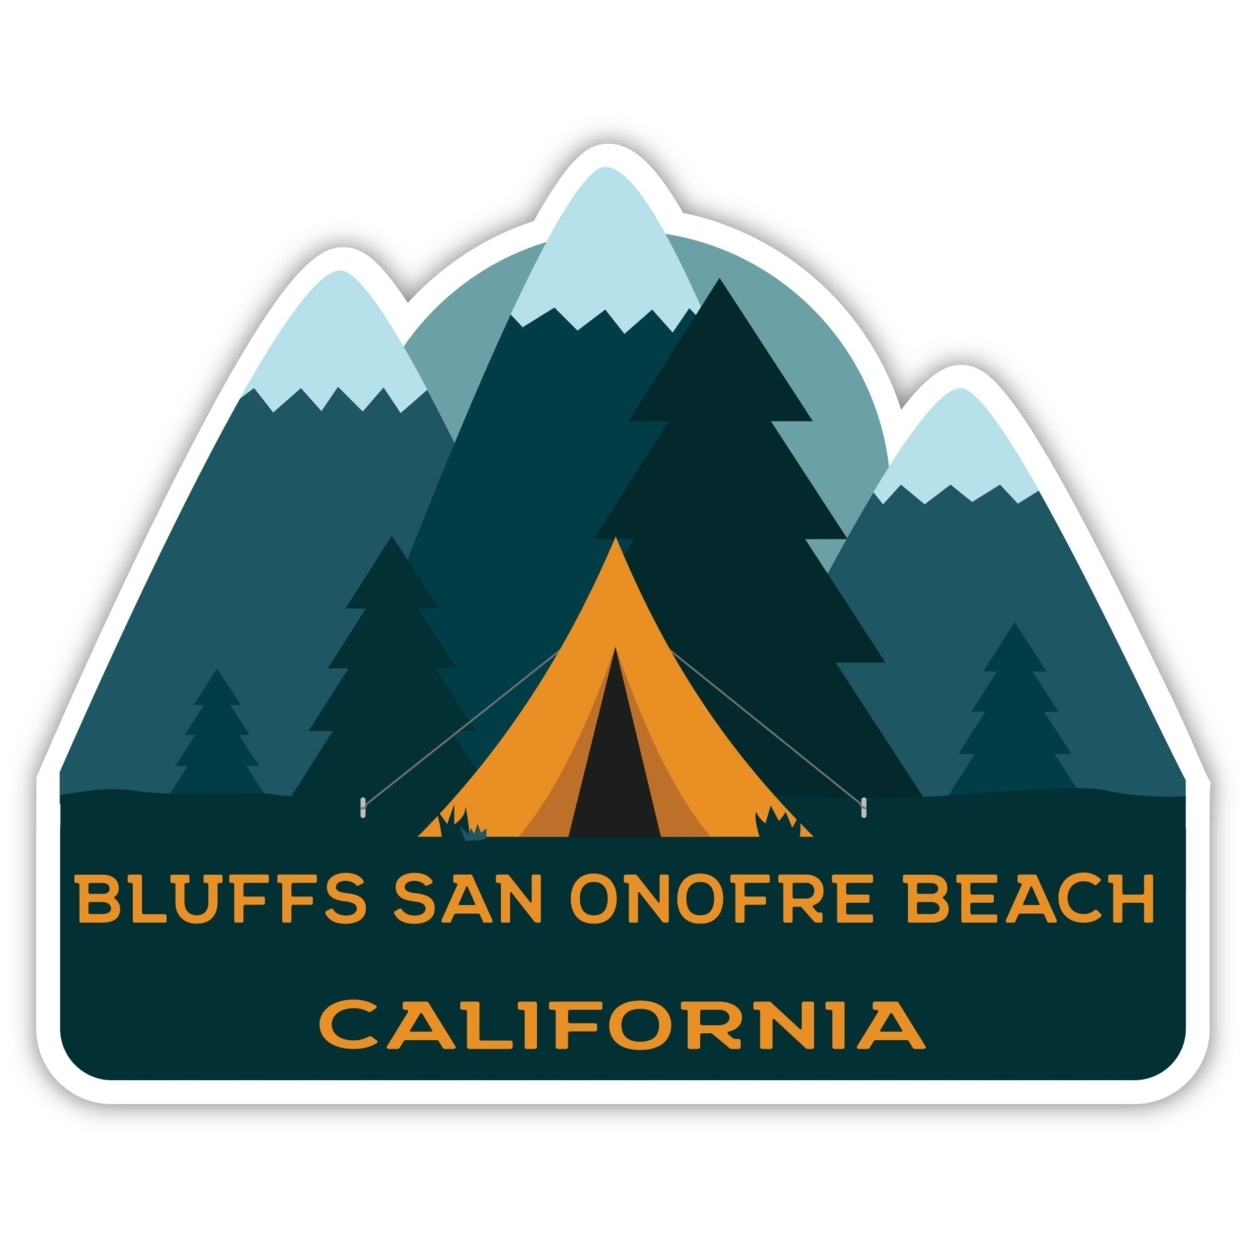 Bluffs San Onofre Beach California Souvenir Decorative Stickers (Choose Theme And Size) - 4-Pack, 8-Inch, Adventures Awaits